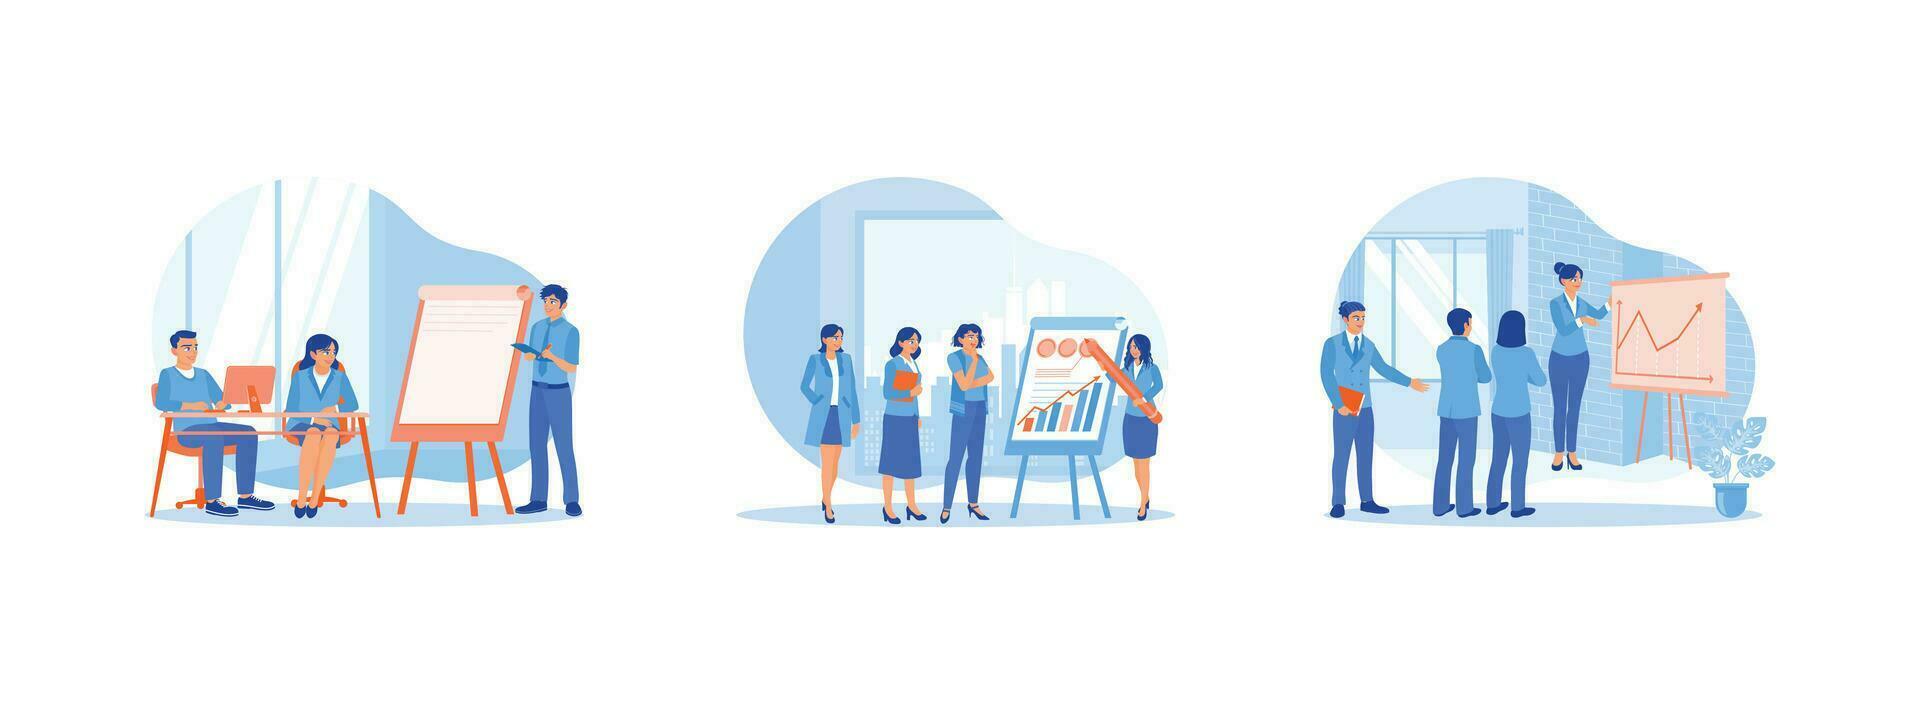 Briefing concept. Listen to explanations during the presentation. Flip chart presentation about company business strategy. Set Trend Modern vector flat illustration